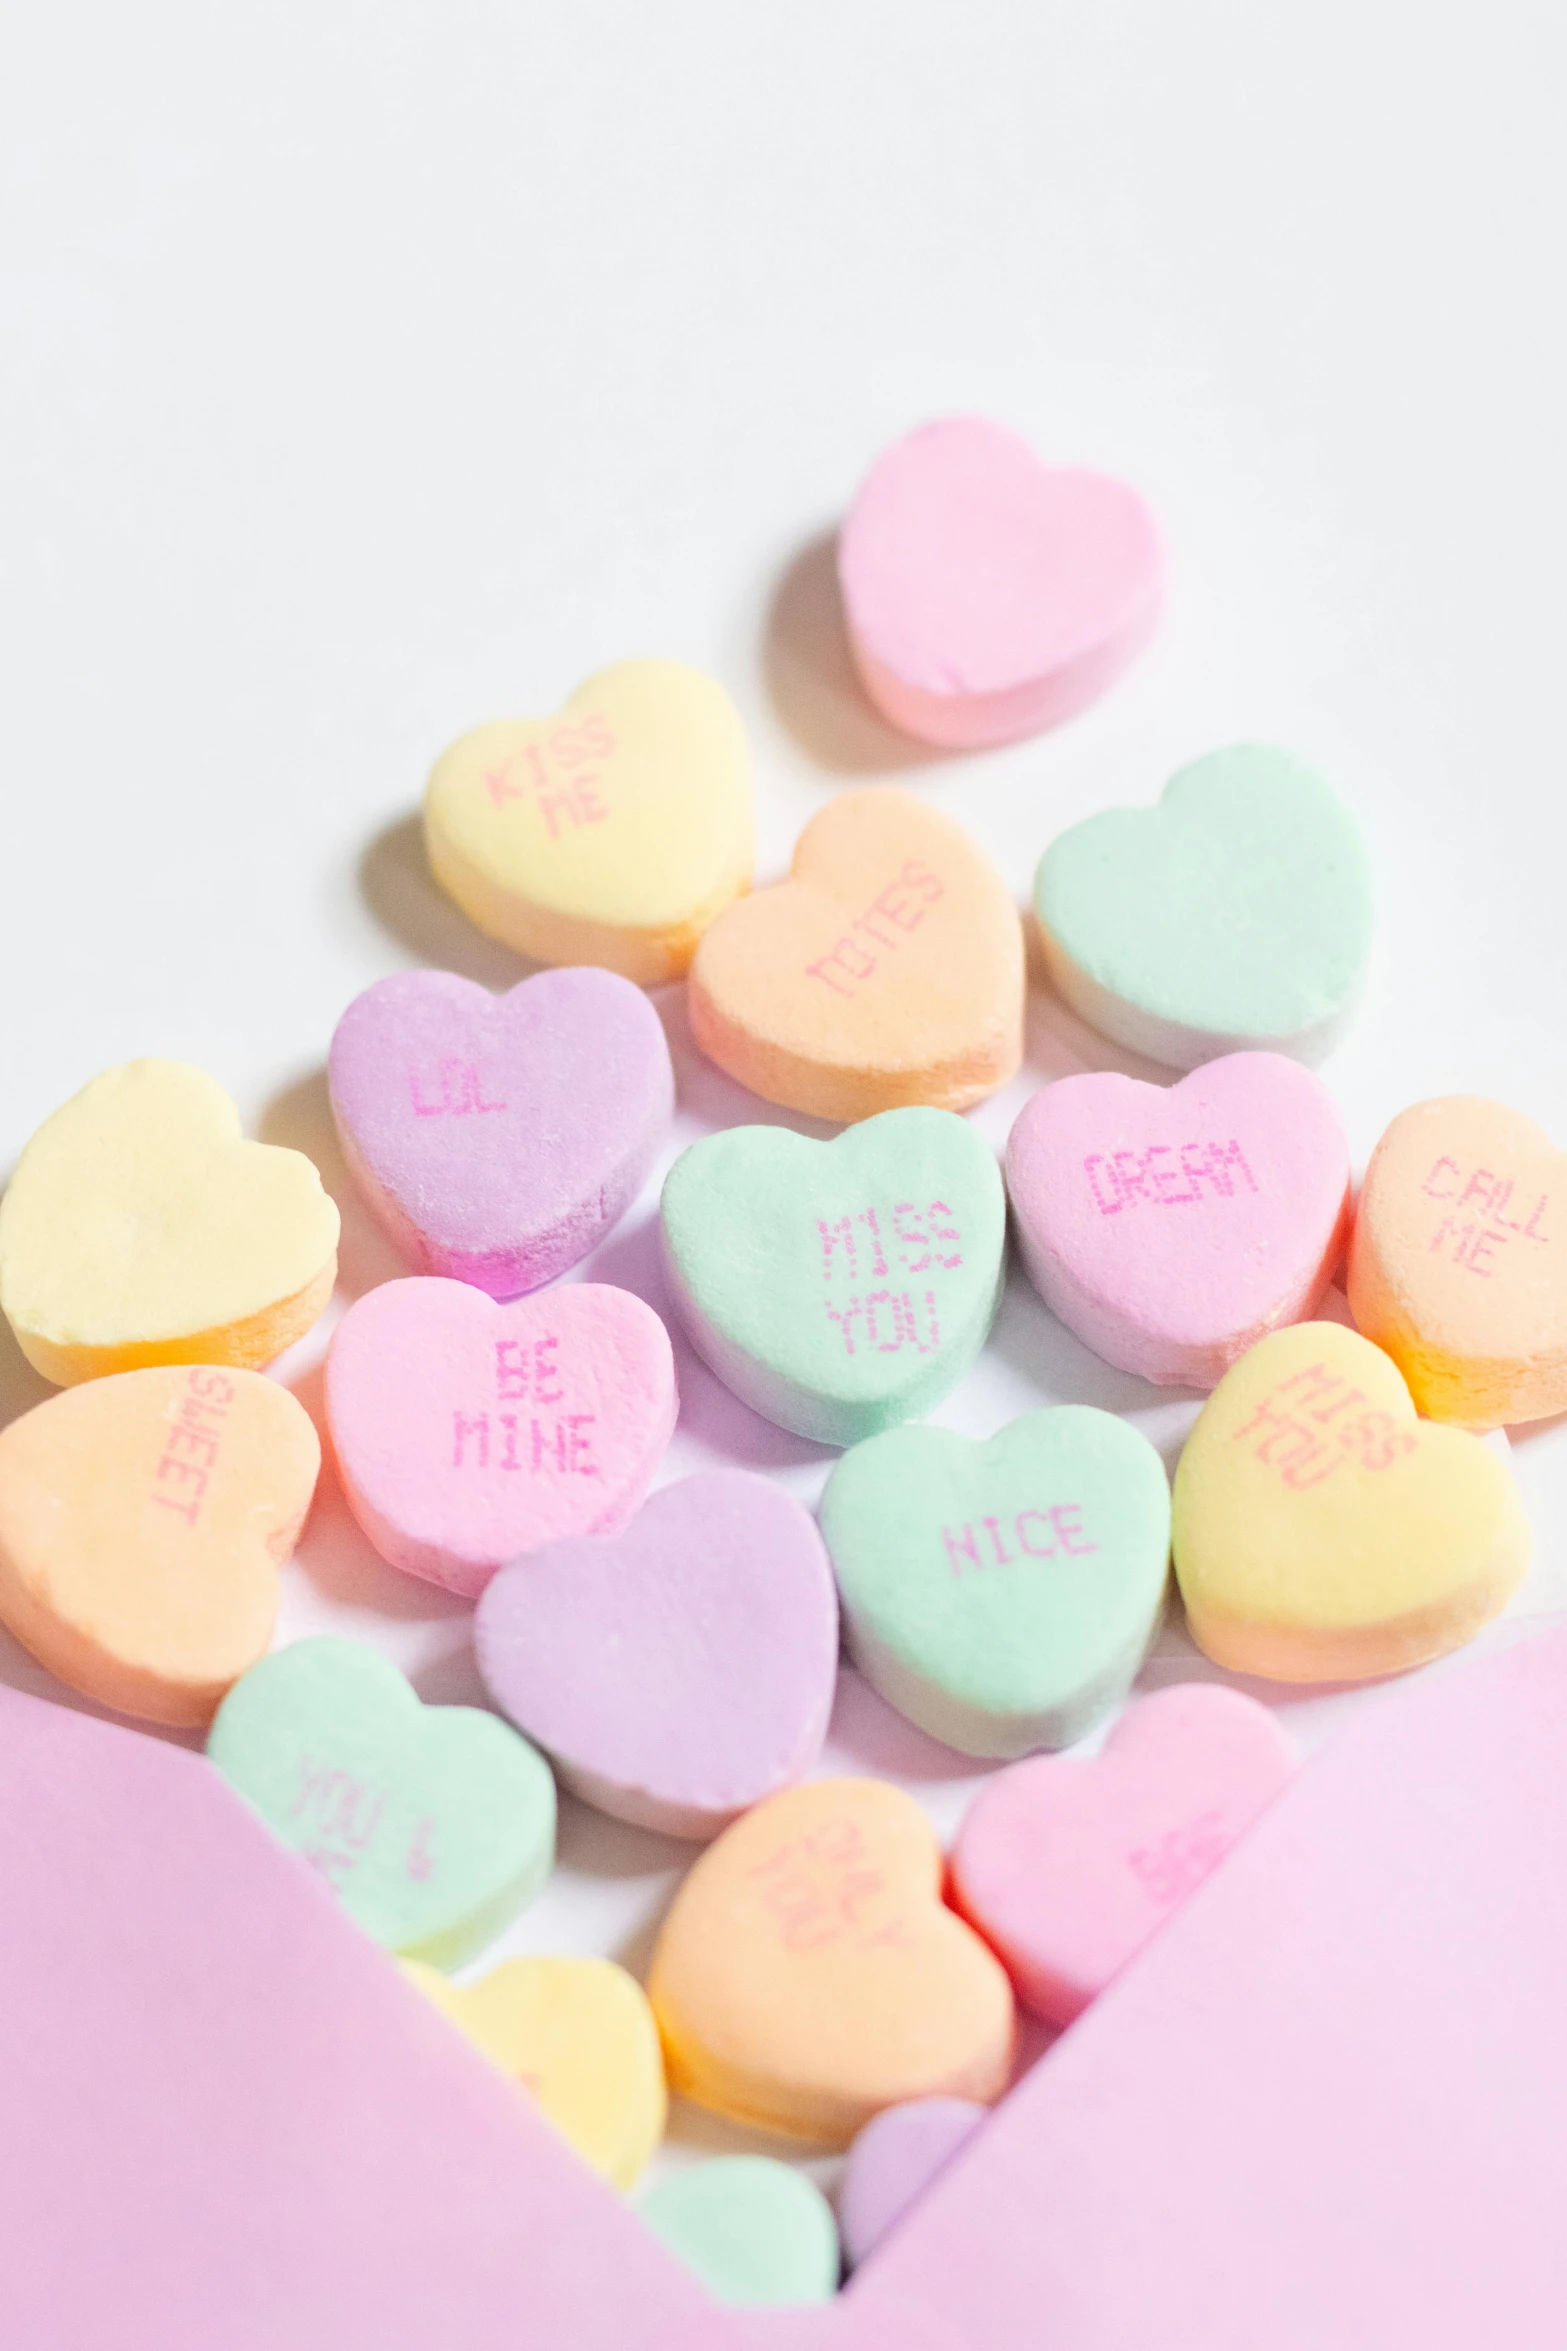 conversation hearts are shown sitting in a pile